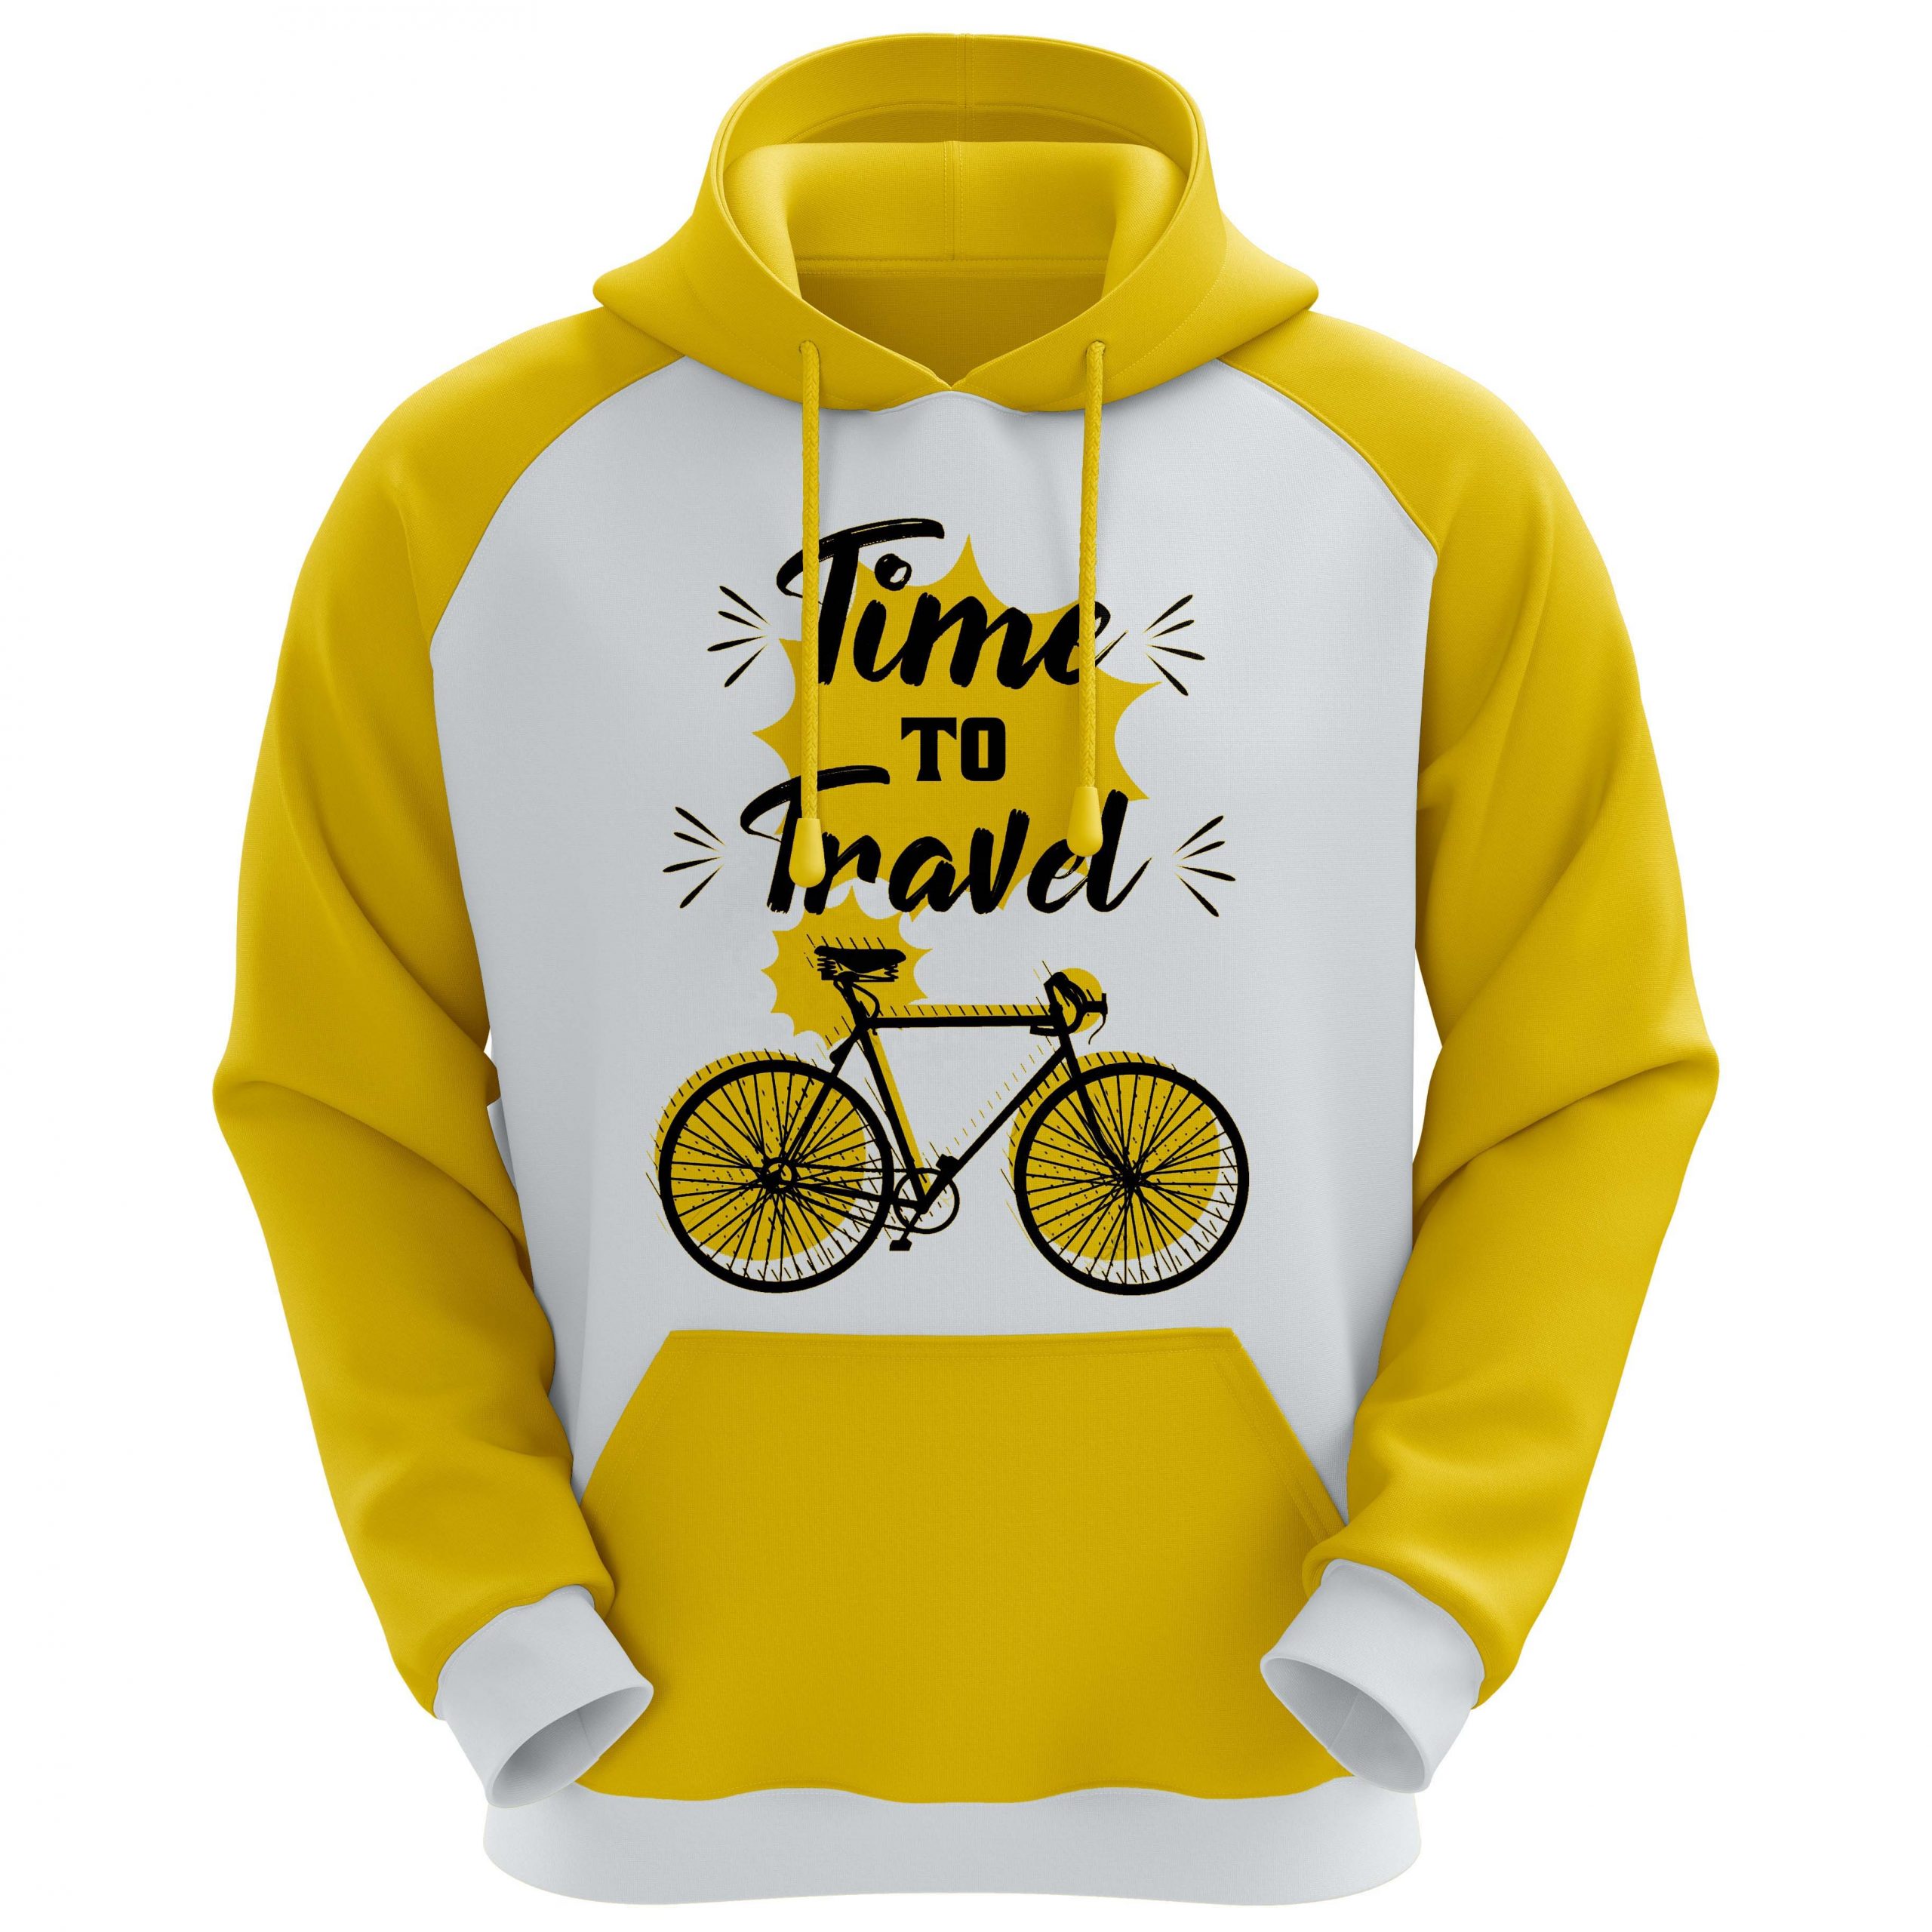 Unisex 180 GSM Jersey Knit Cotton Feel Sublimation Hoodie